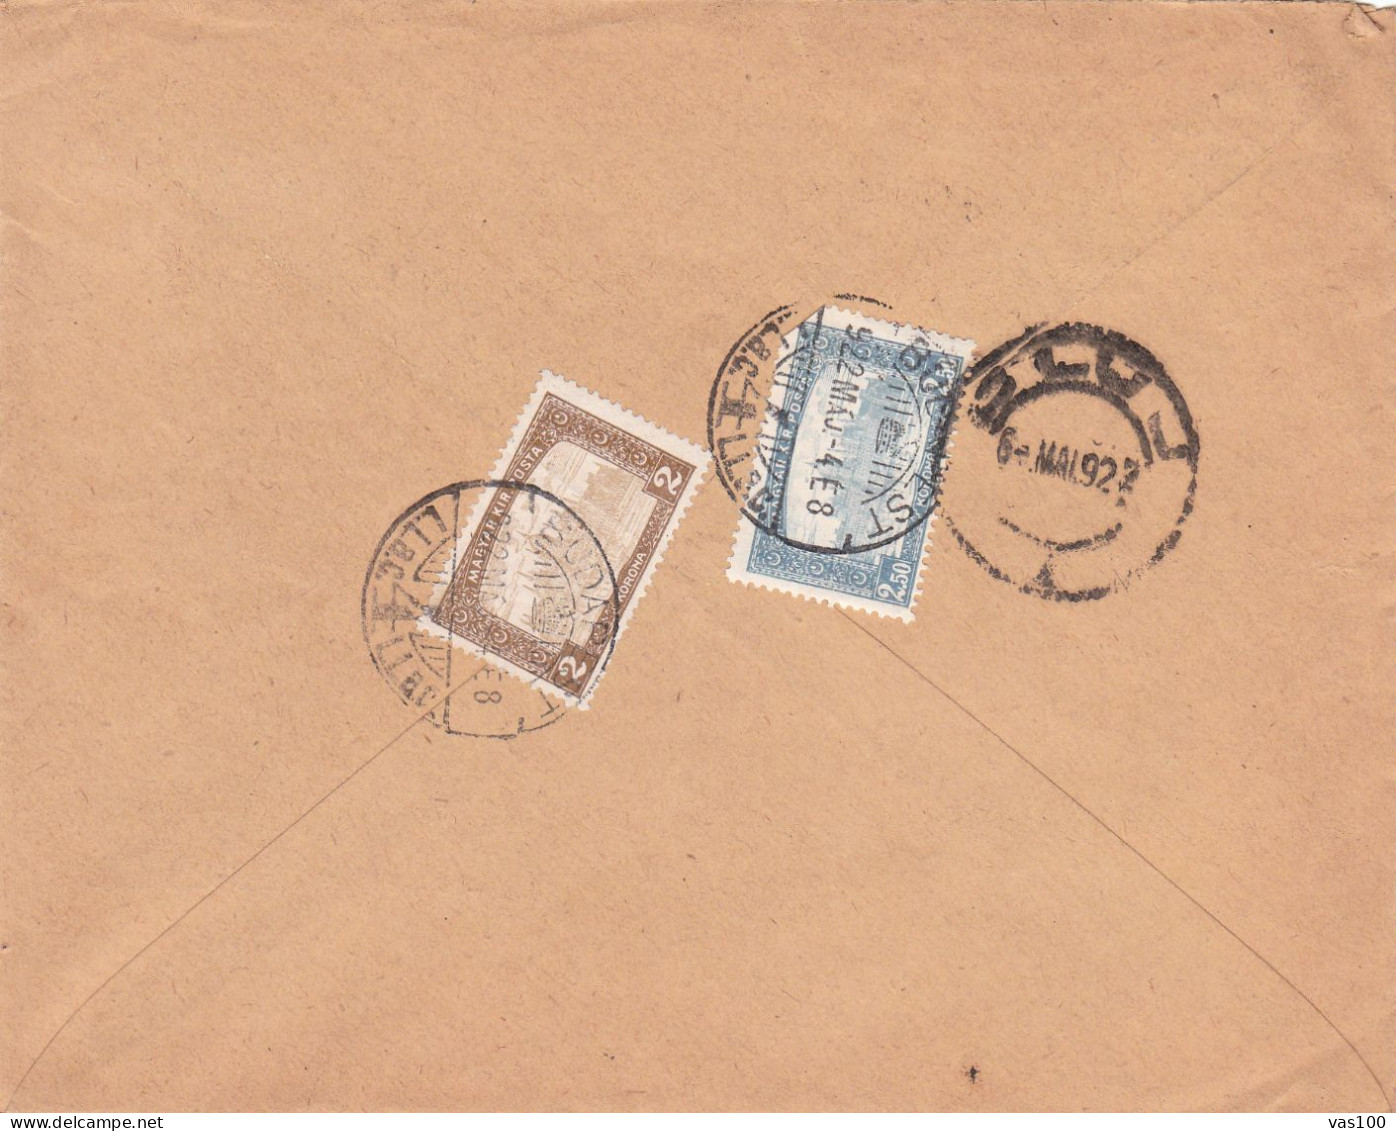 POSTAL HISTORY ,JSTAMPS ON ENTERPRISE HEADER COVER, 1922, HUNGARY - Covers & Documents